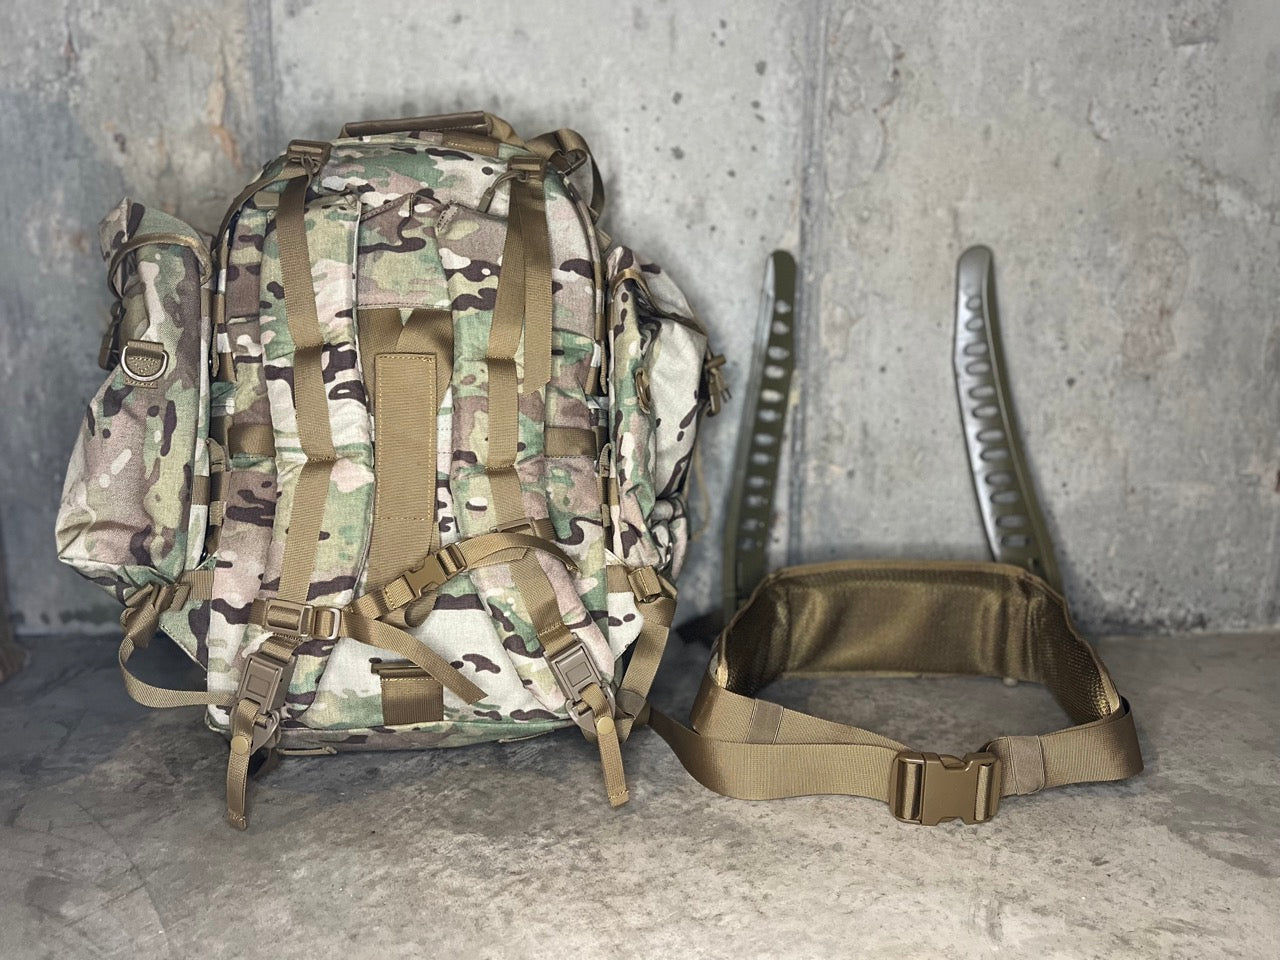 Medium MOLLE and Frame Removed.jpeg__PID:4bd2bcf8-4adc-41ee-8b83-3b436cd5641c